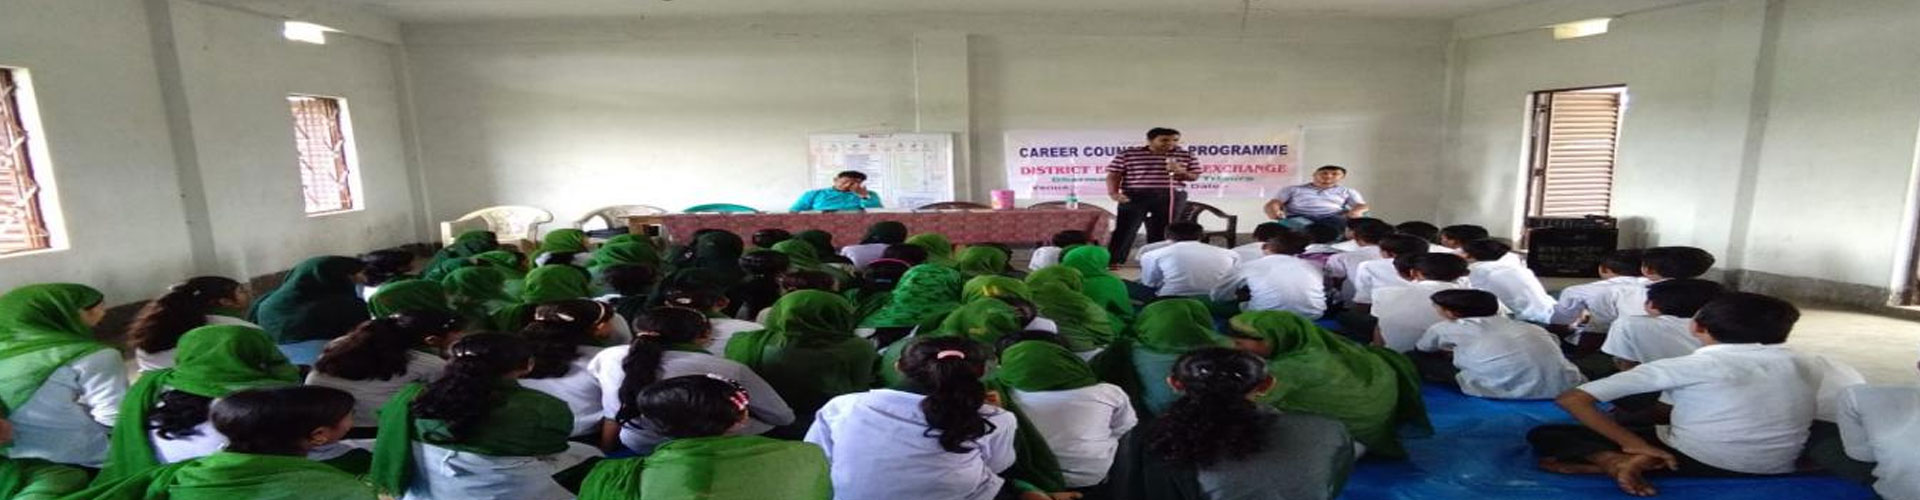 Image of Career Counselling Programme in Schools and Colleges 